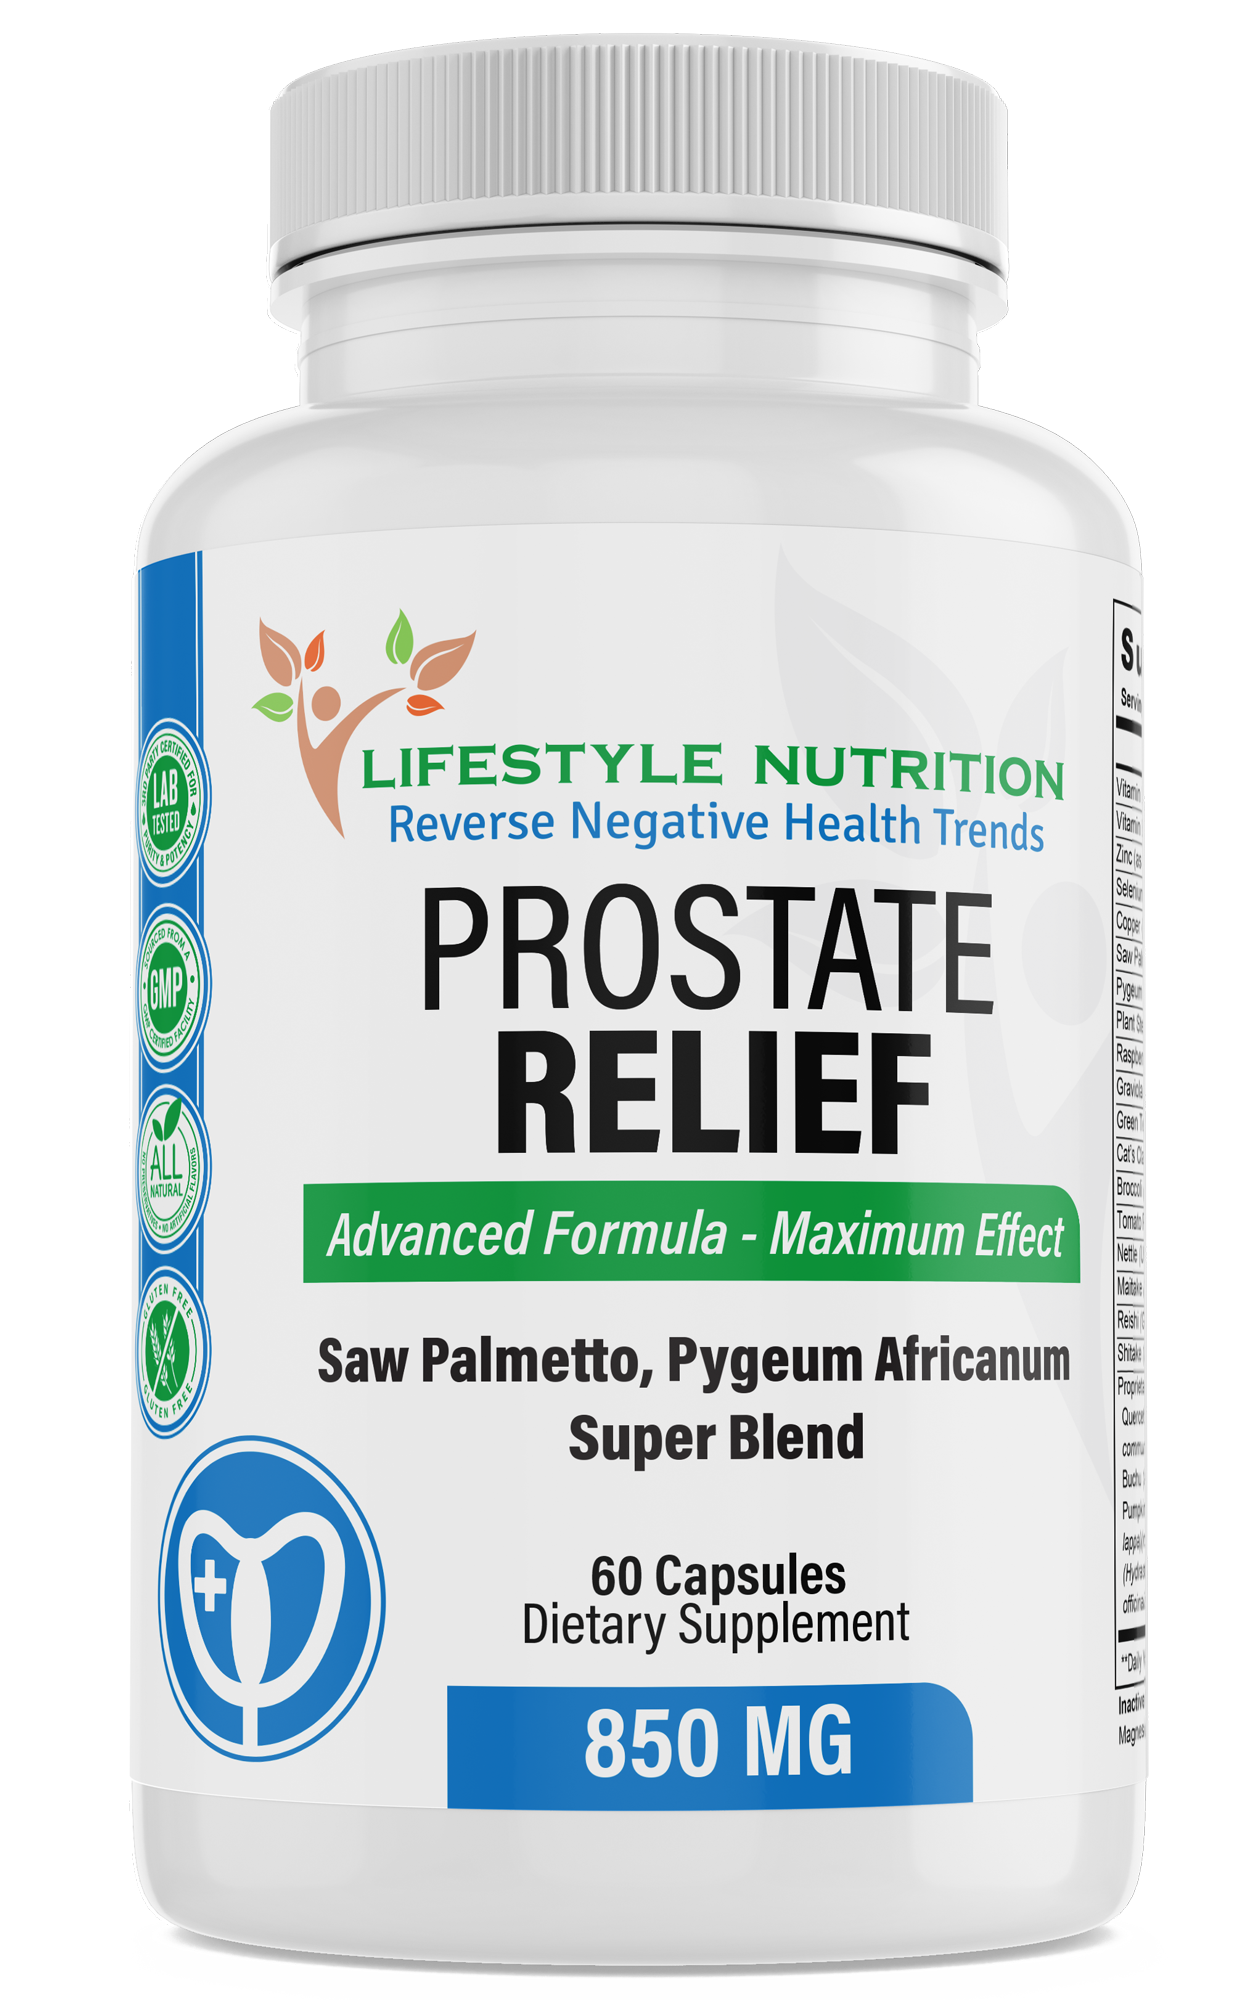 PROSTATE RELIEF